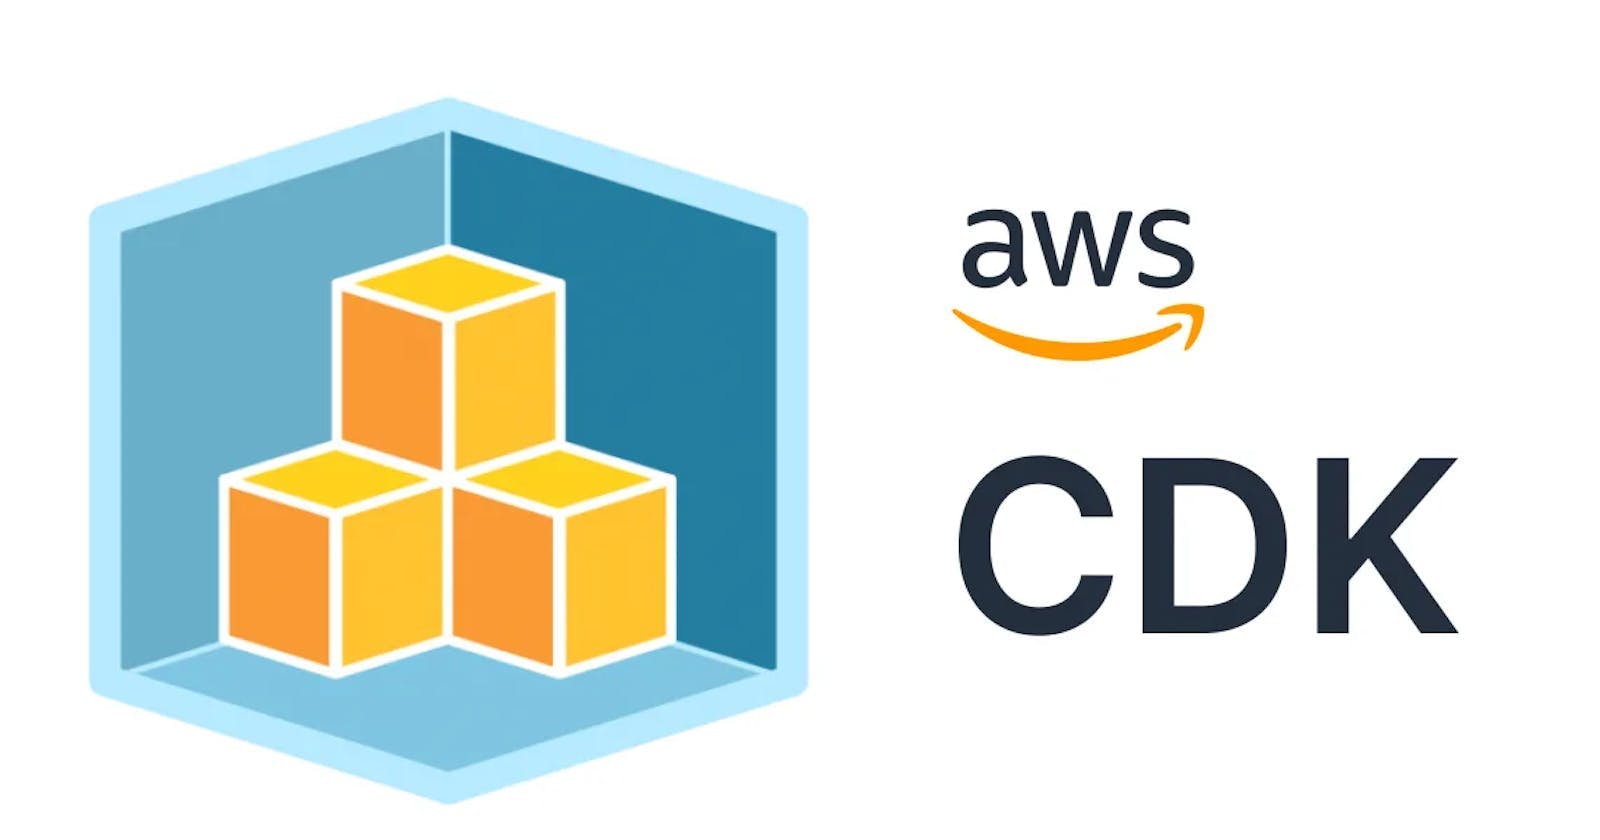 What does the AWS CDK Diff command do